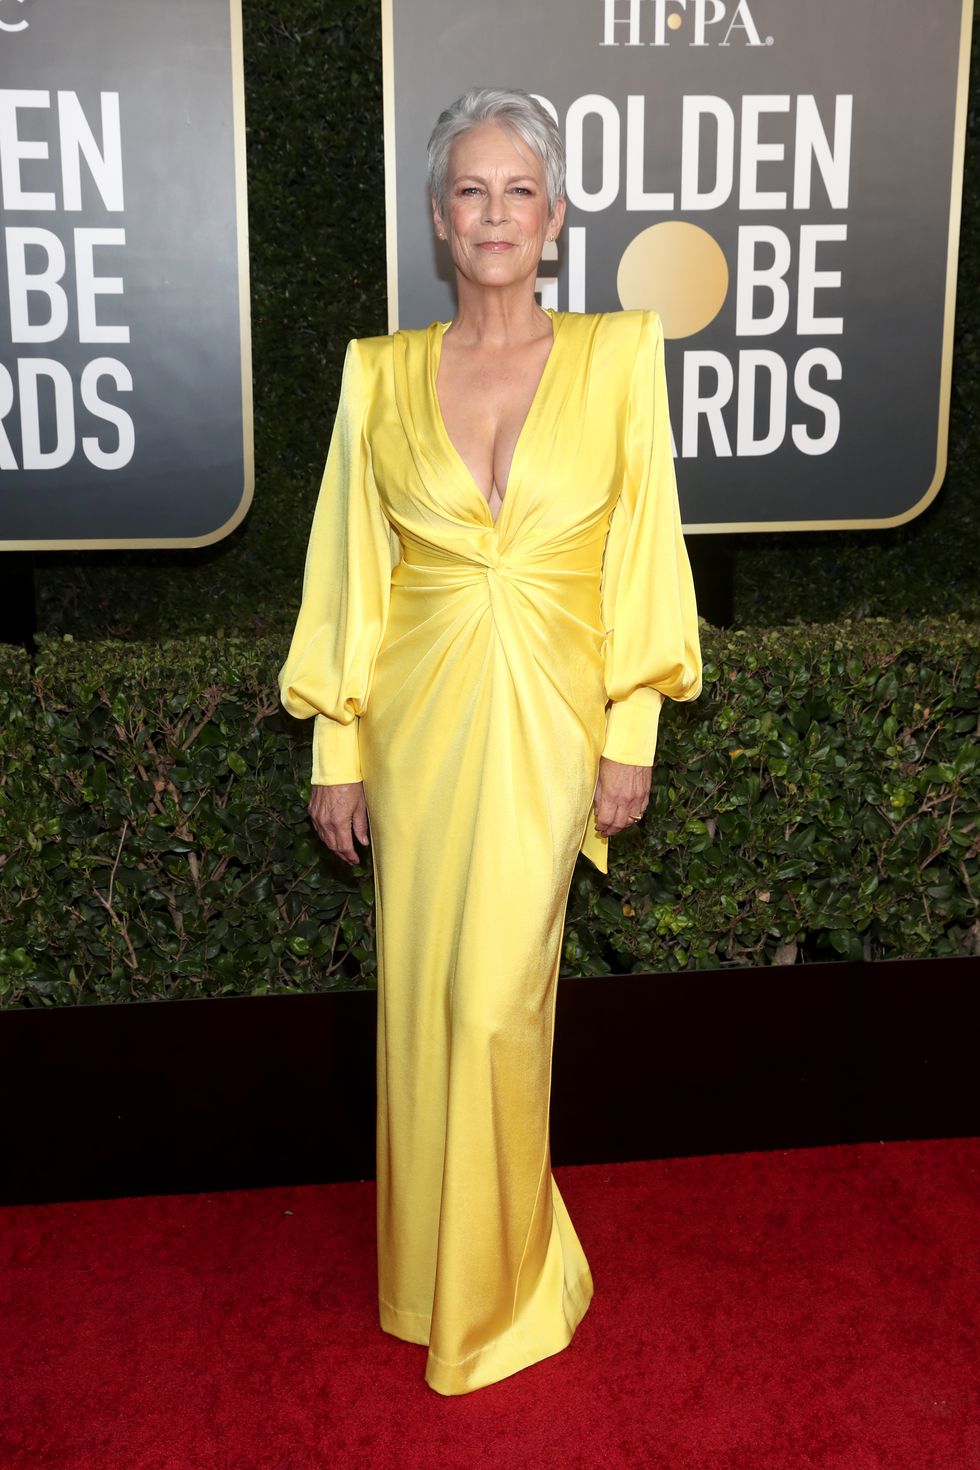 beverly hills, california 78th annual golden globe awards    pictured jamie lee curtis attends the 78th annual golden globe awards held at the beverly hilton and broadcast on february 28, 2021 in beverly hills, california    photo by todd williamsonnbcnbcu photo bank via getty images